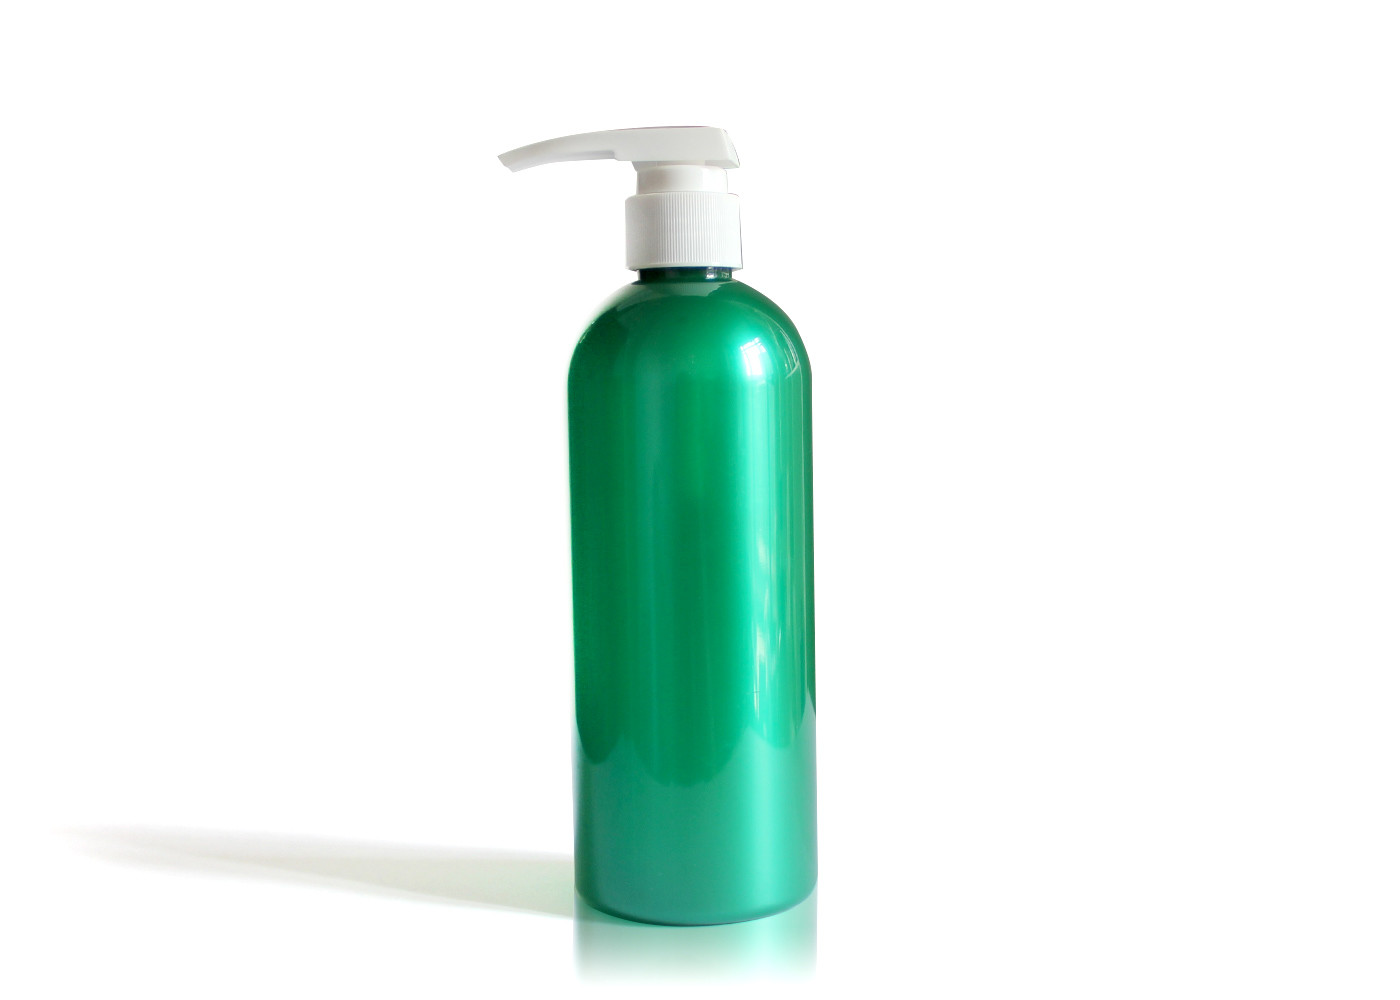  Lotion Boston Round Pump Bottles , Standard Capacity Green Lotion Bottle 500ML Manufactures